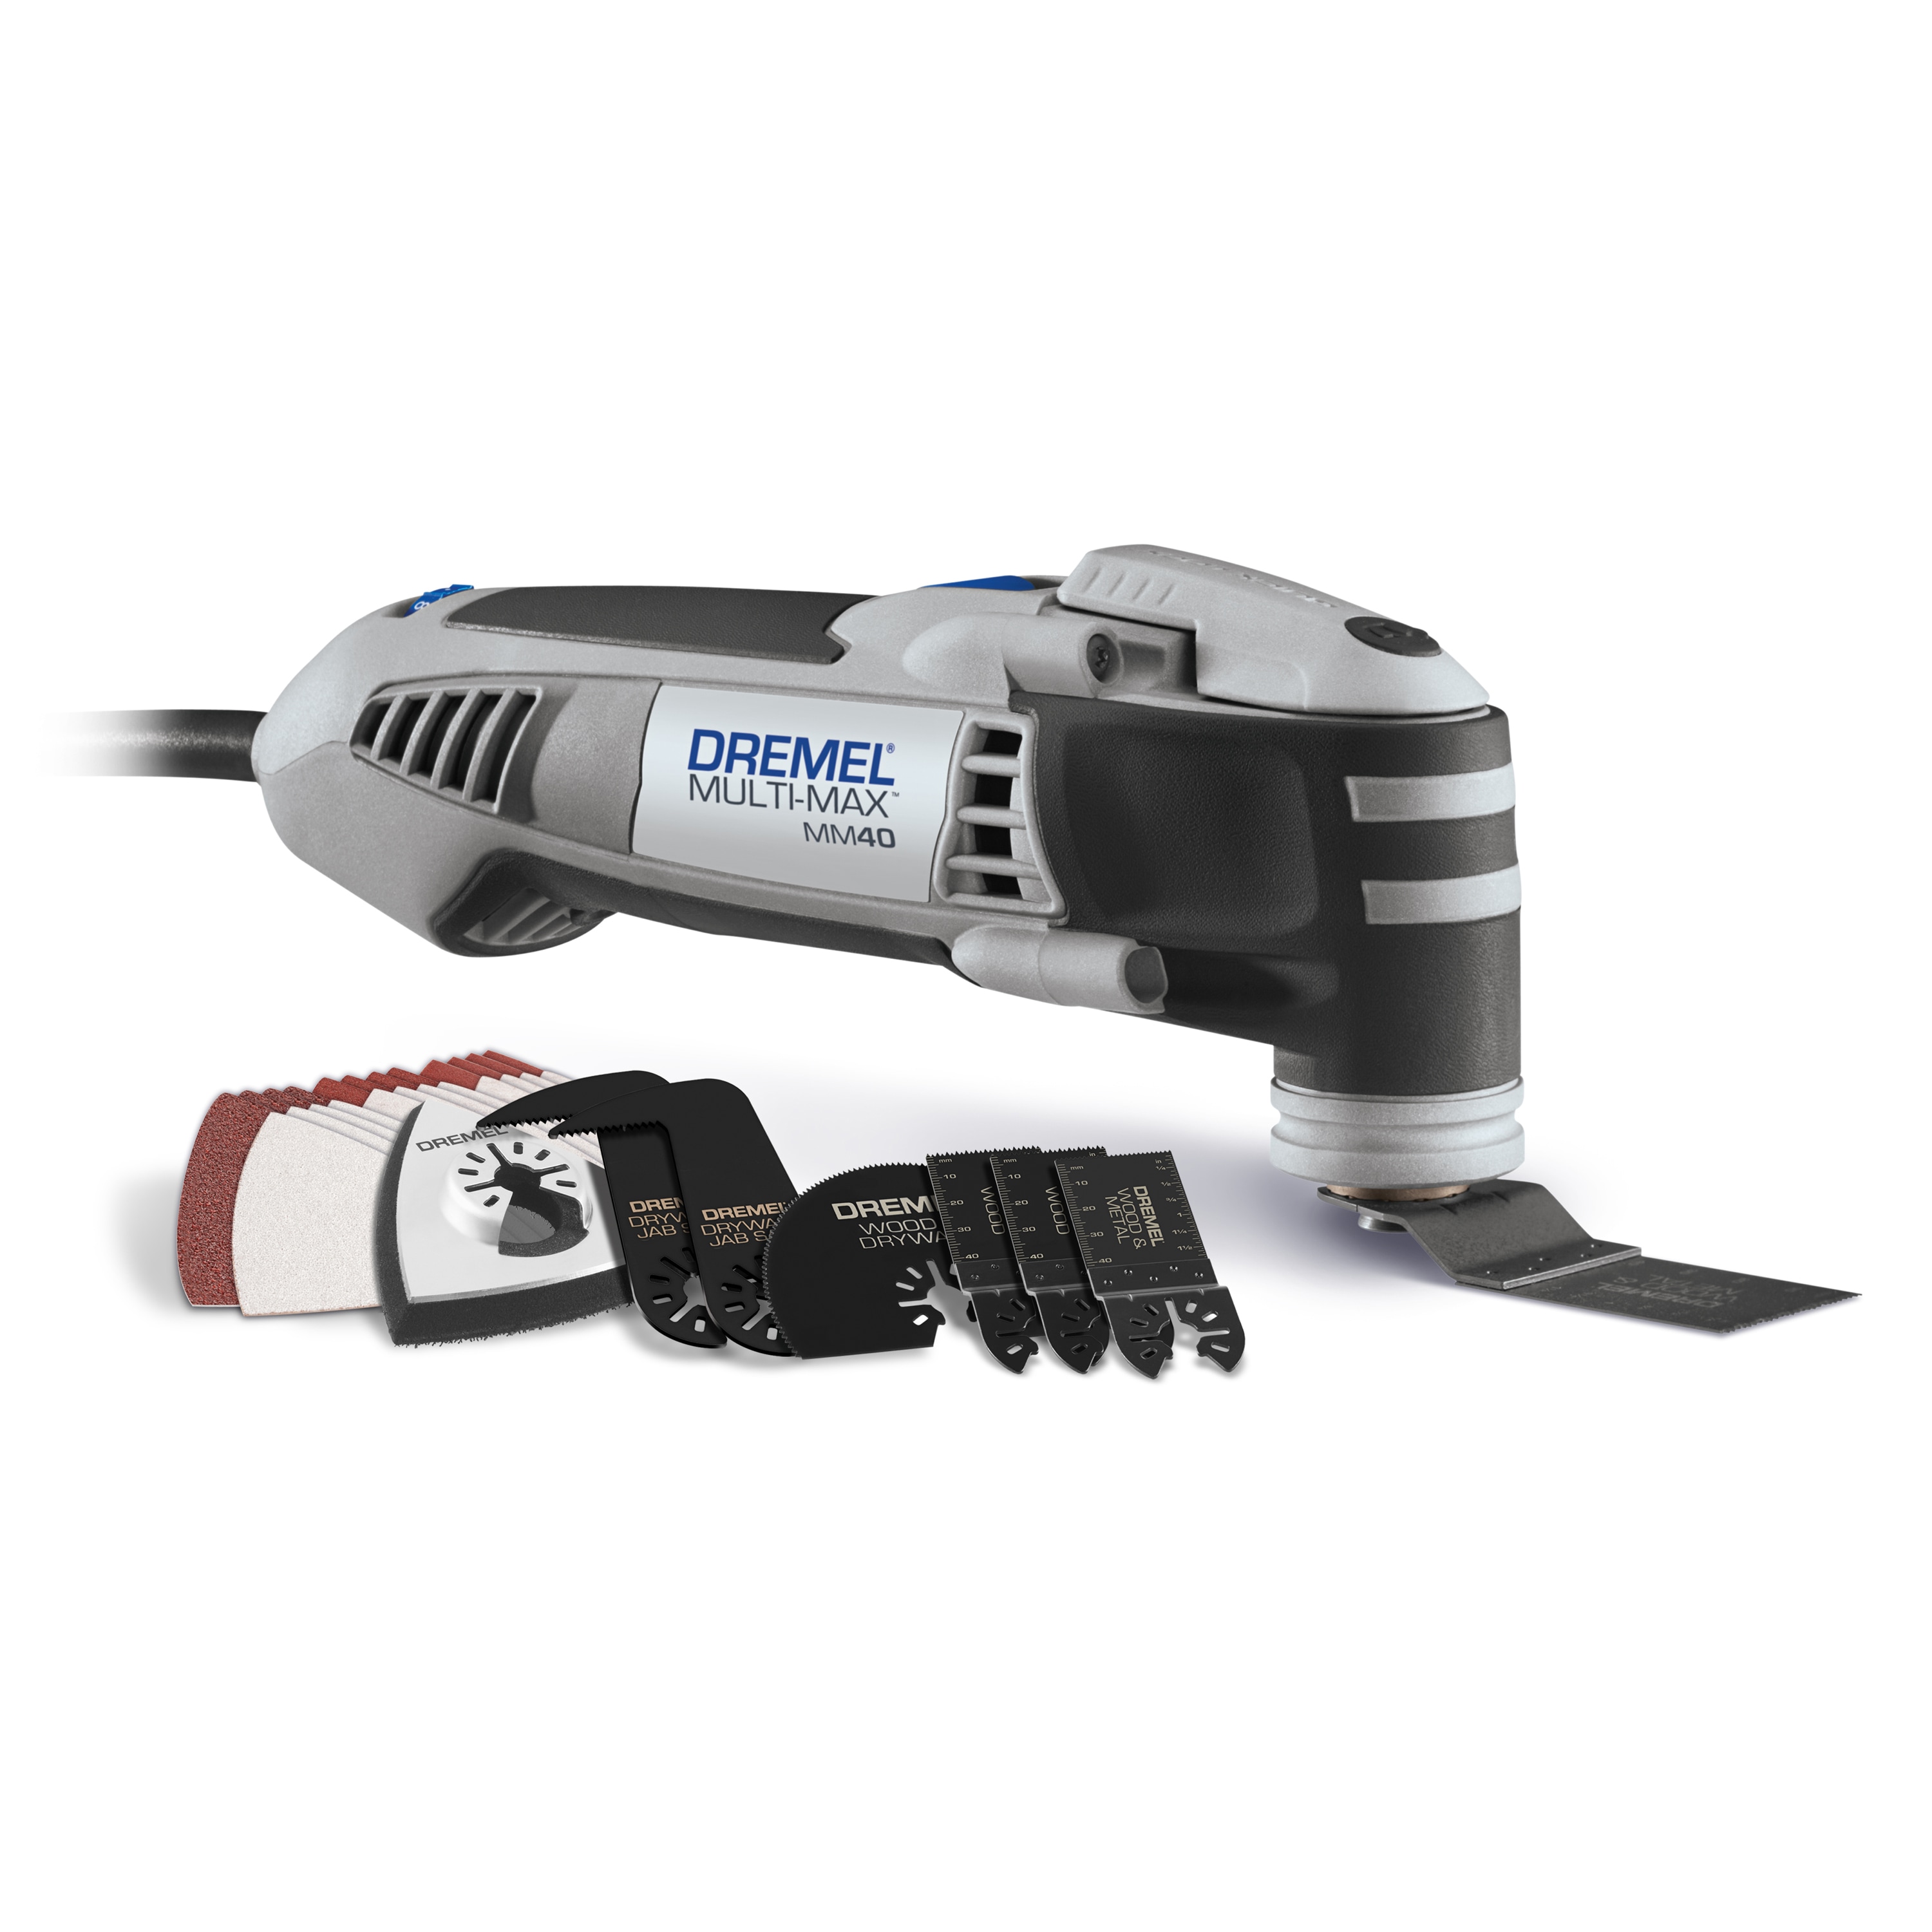 Dremel Multi-Max 31-Piece Variable Speed Oscillating Multi-Tool Kit with Soft Case at Lowes.com